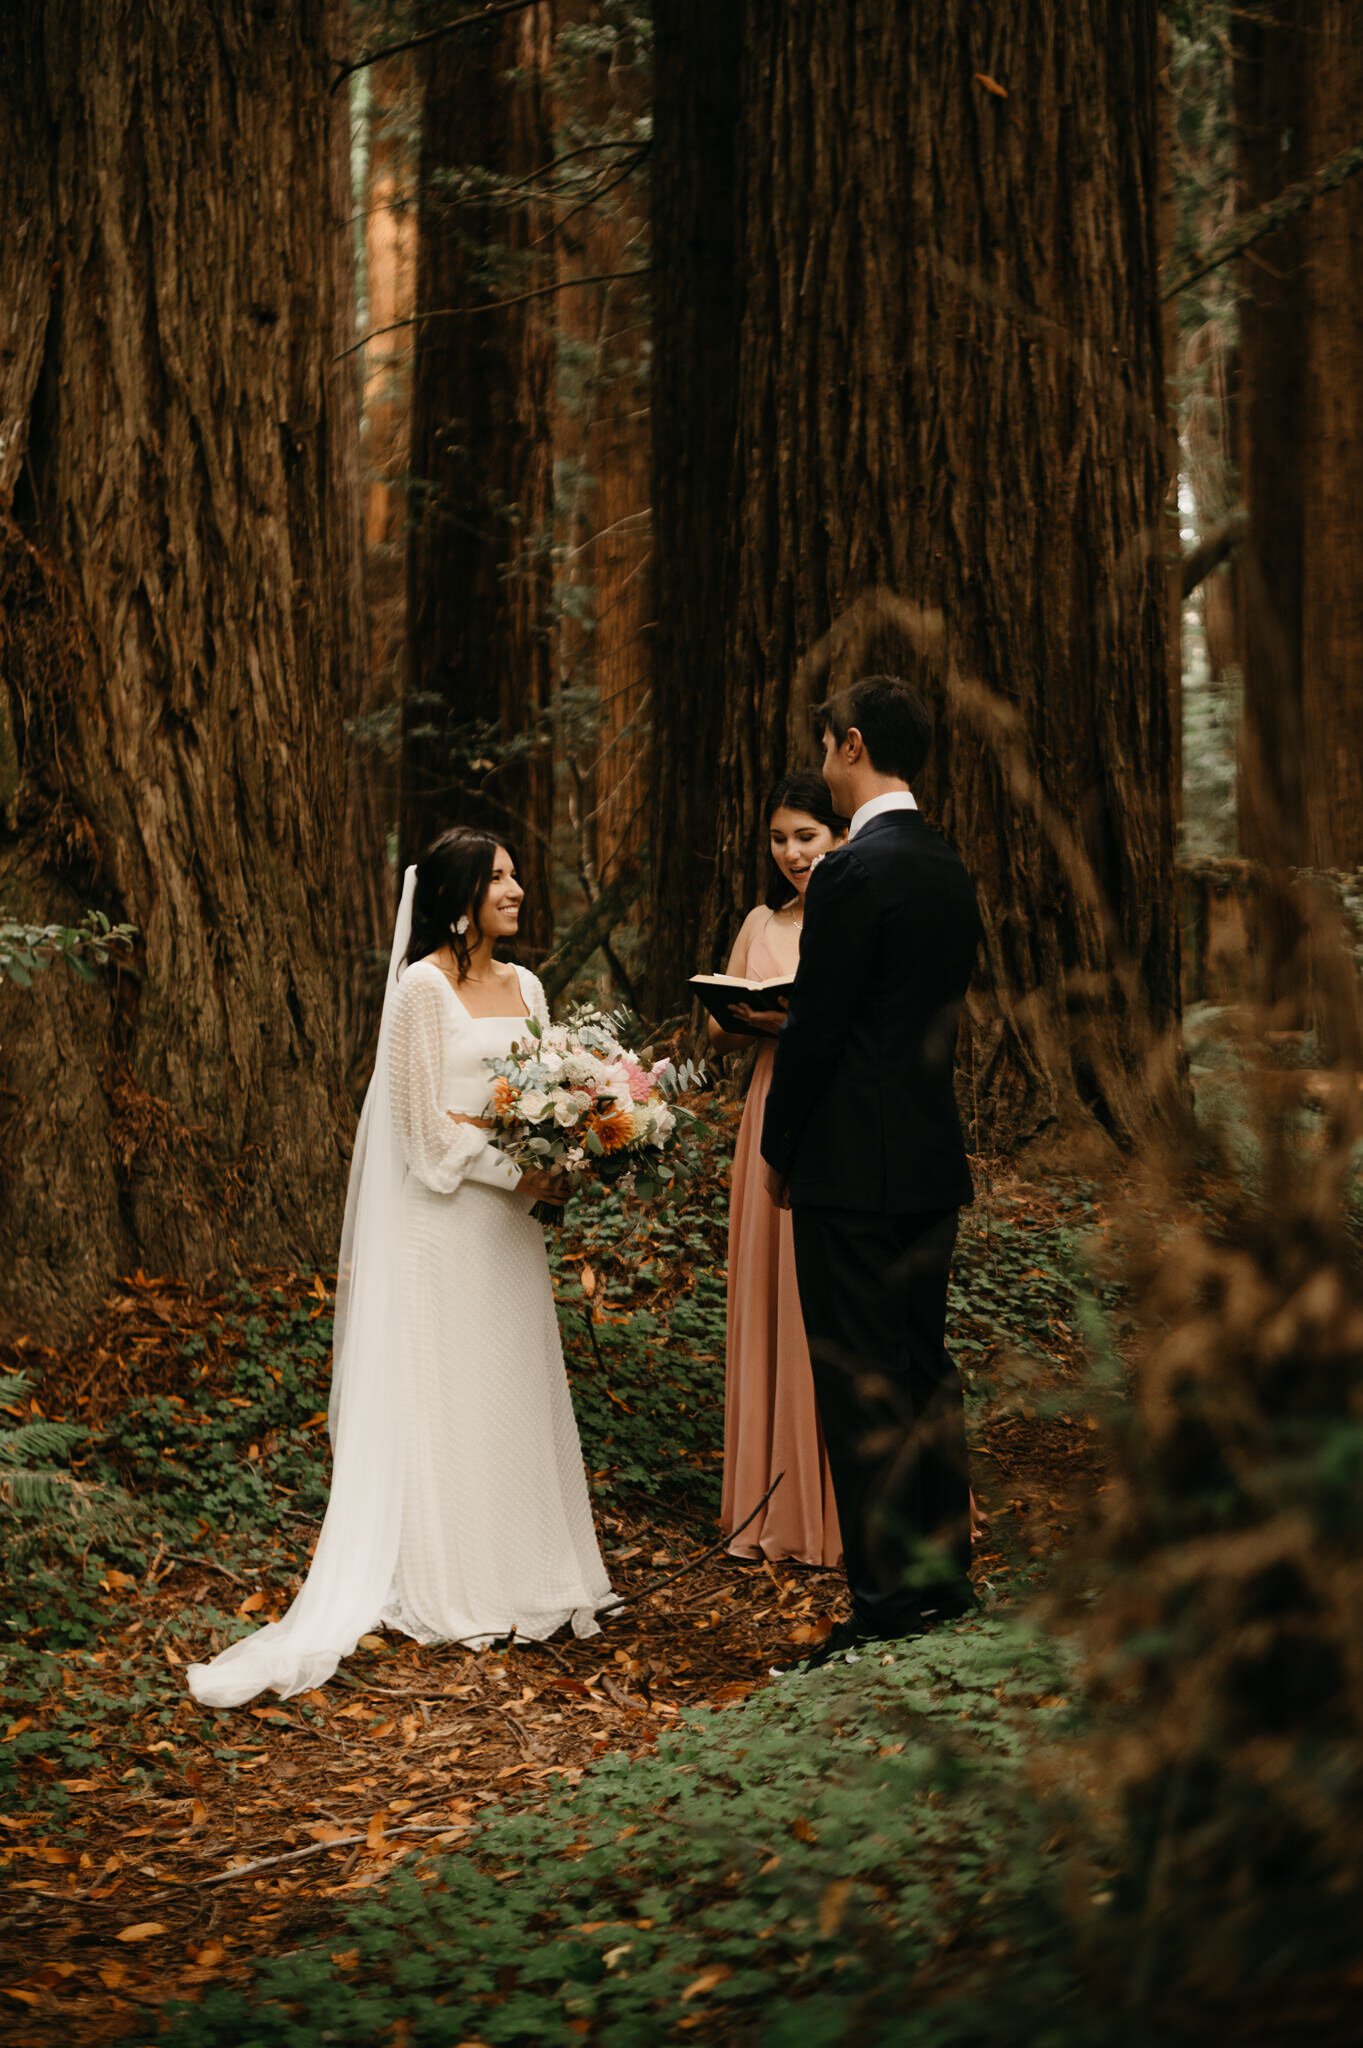 Bride and groom in forest ceremony saying vows in front of officiant, with tall redwood trees in background.